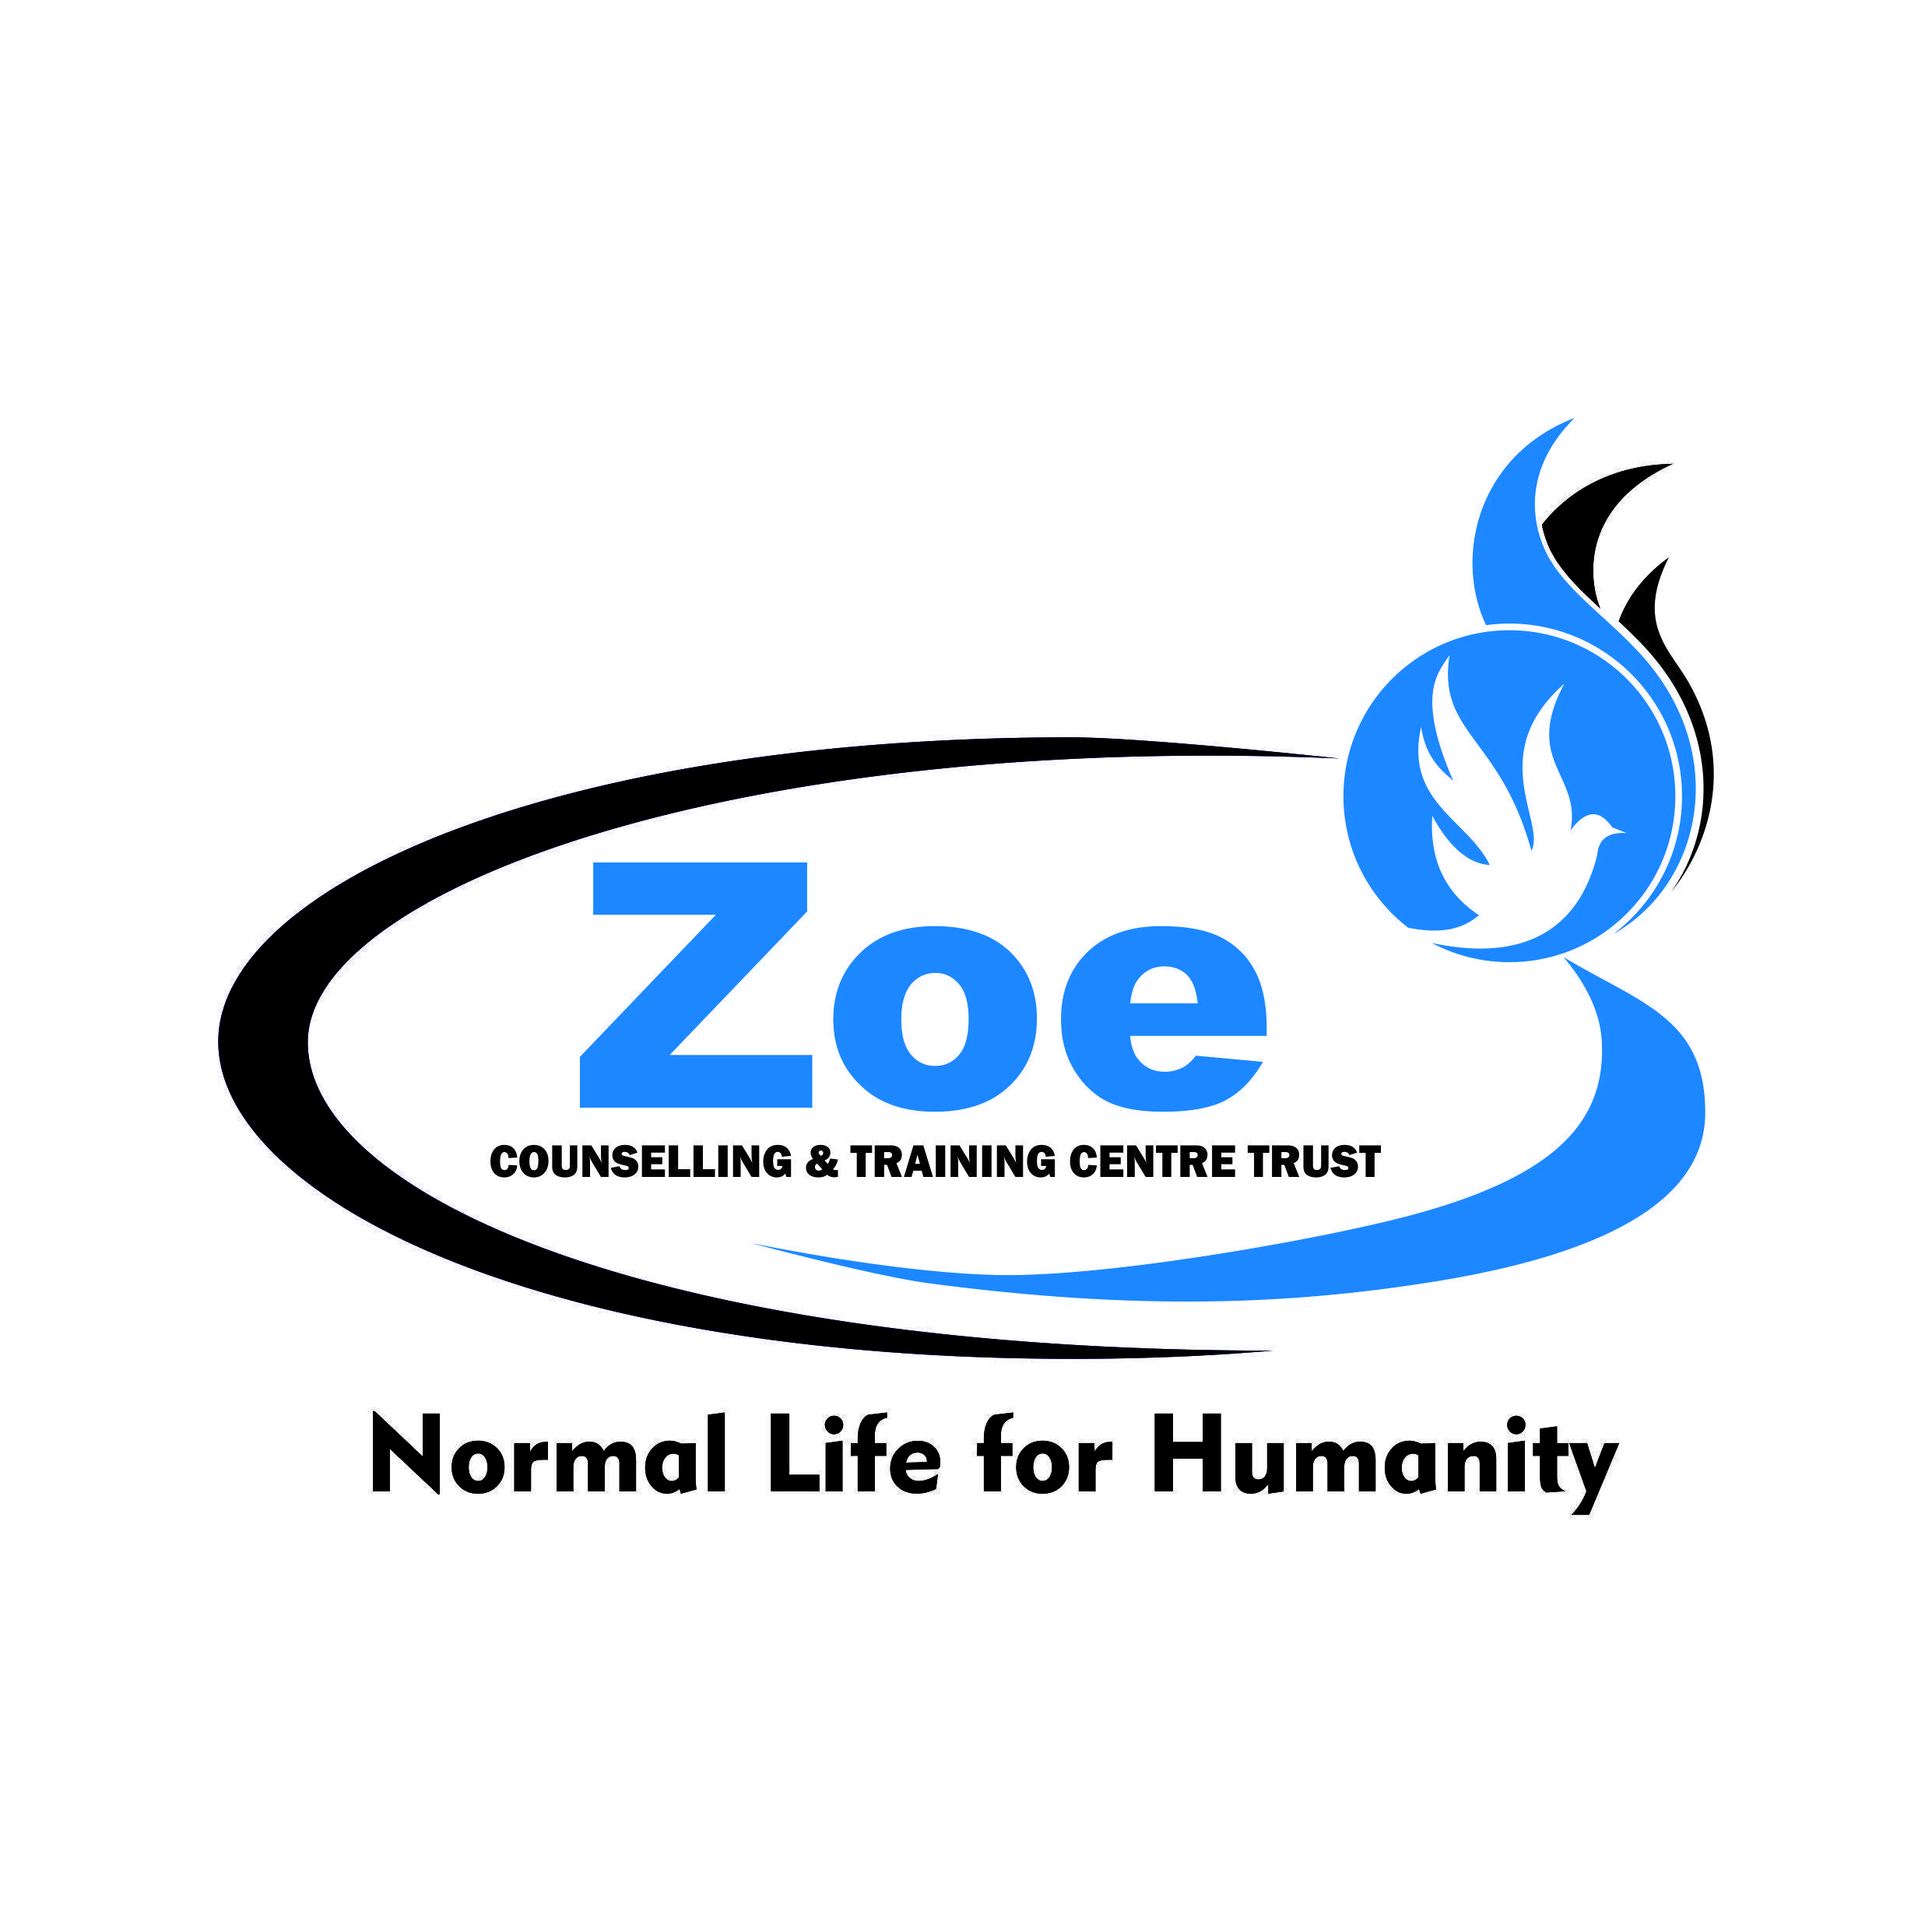 Zoe Logo - Zoe Counselling and Training Centre Trust - Logo - Girls Not Brides